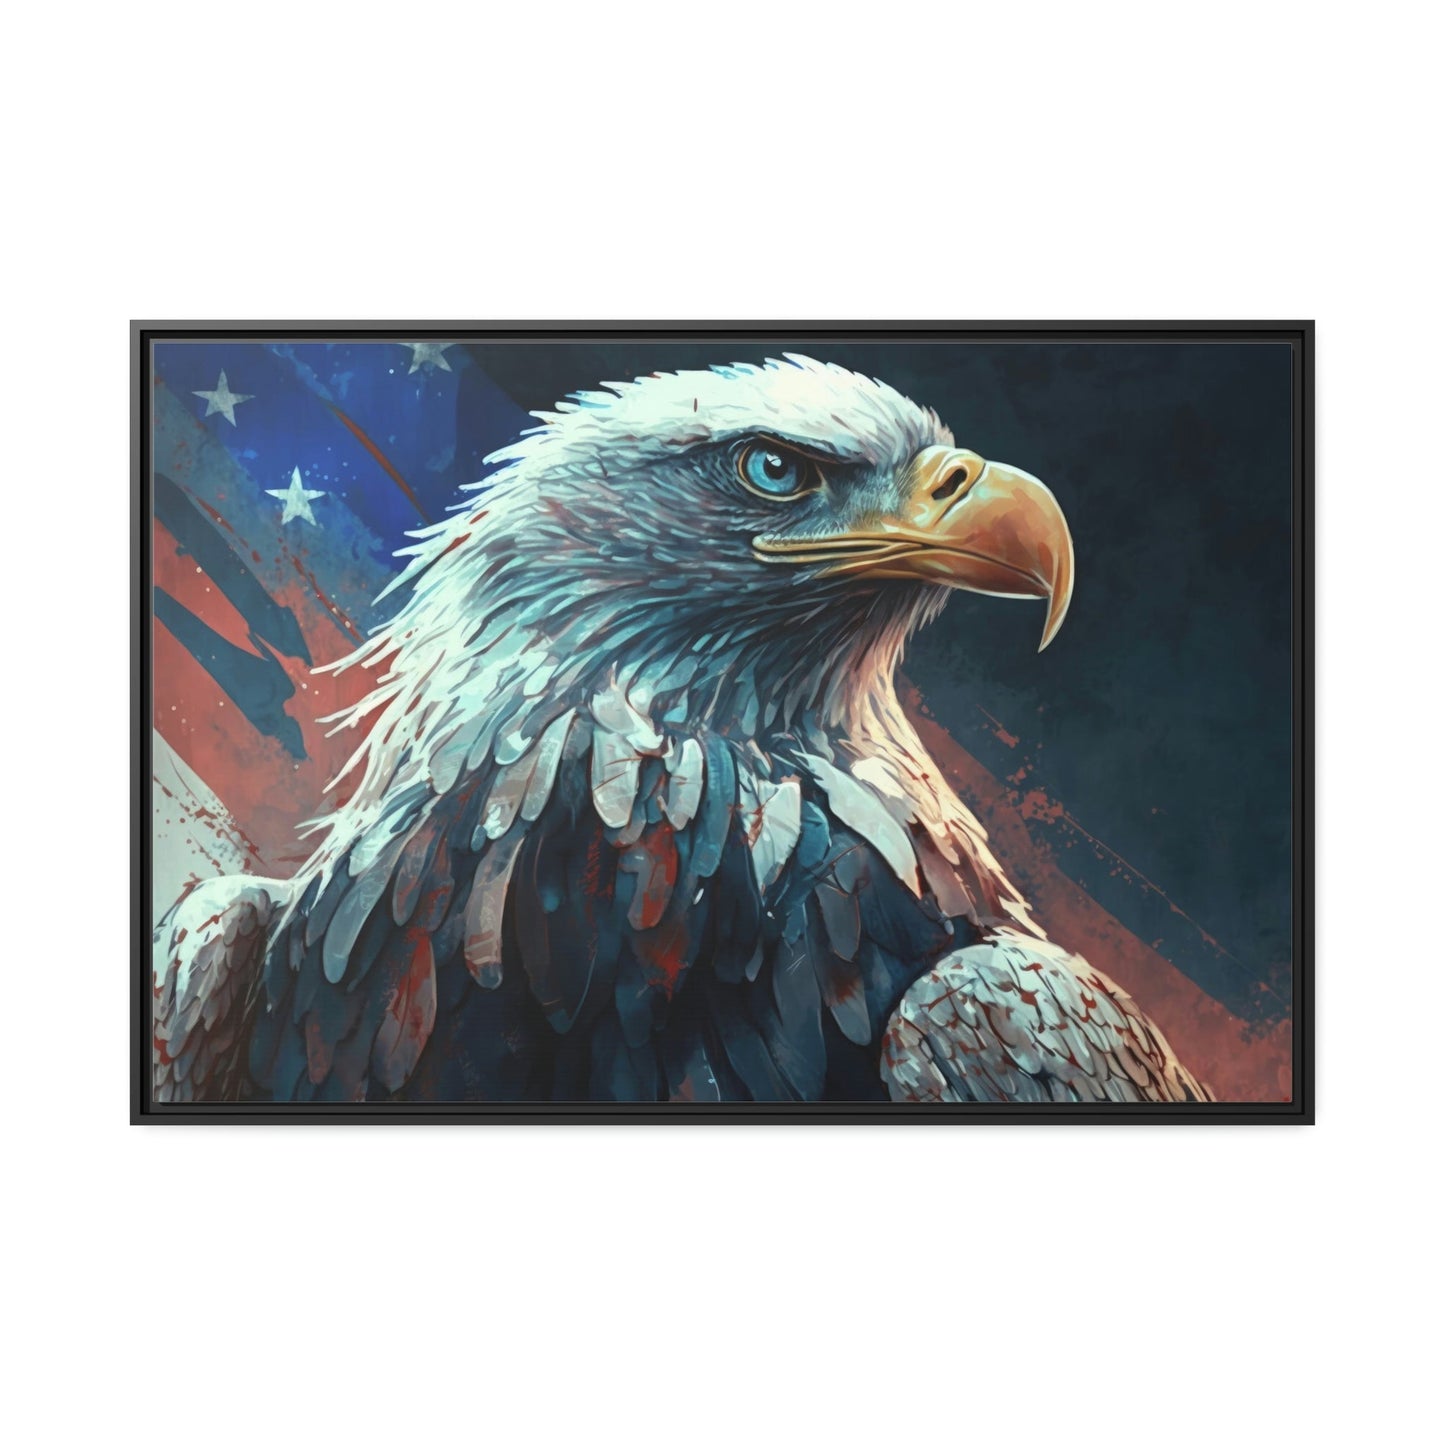 Skybound Spirits: Canvas Wall Art Embracing the Ethereal Presence of Eagles